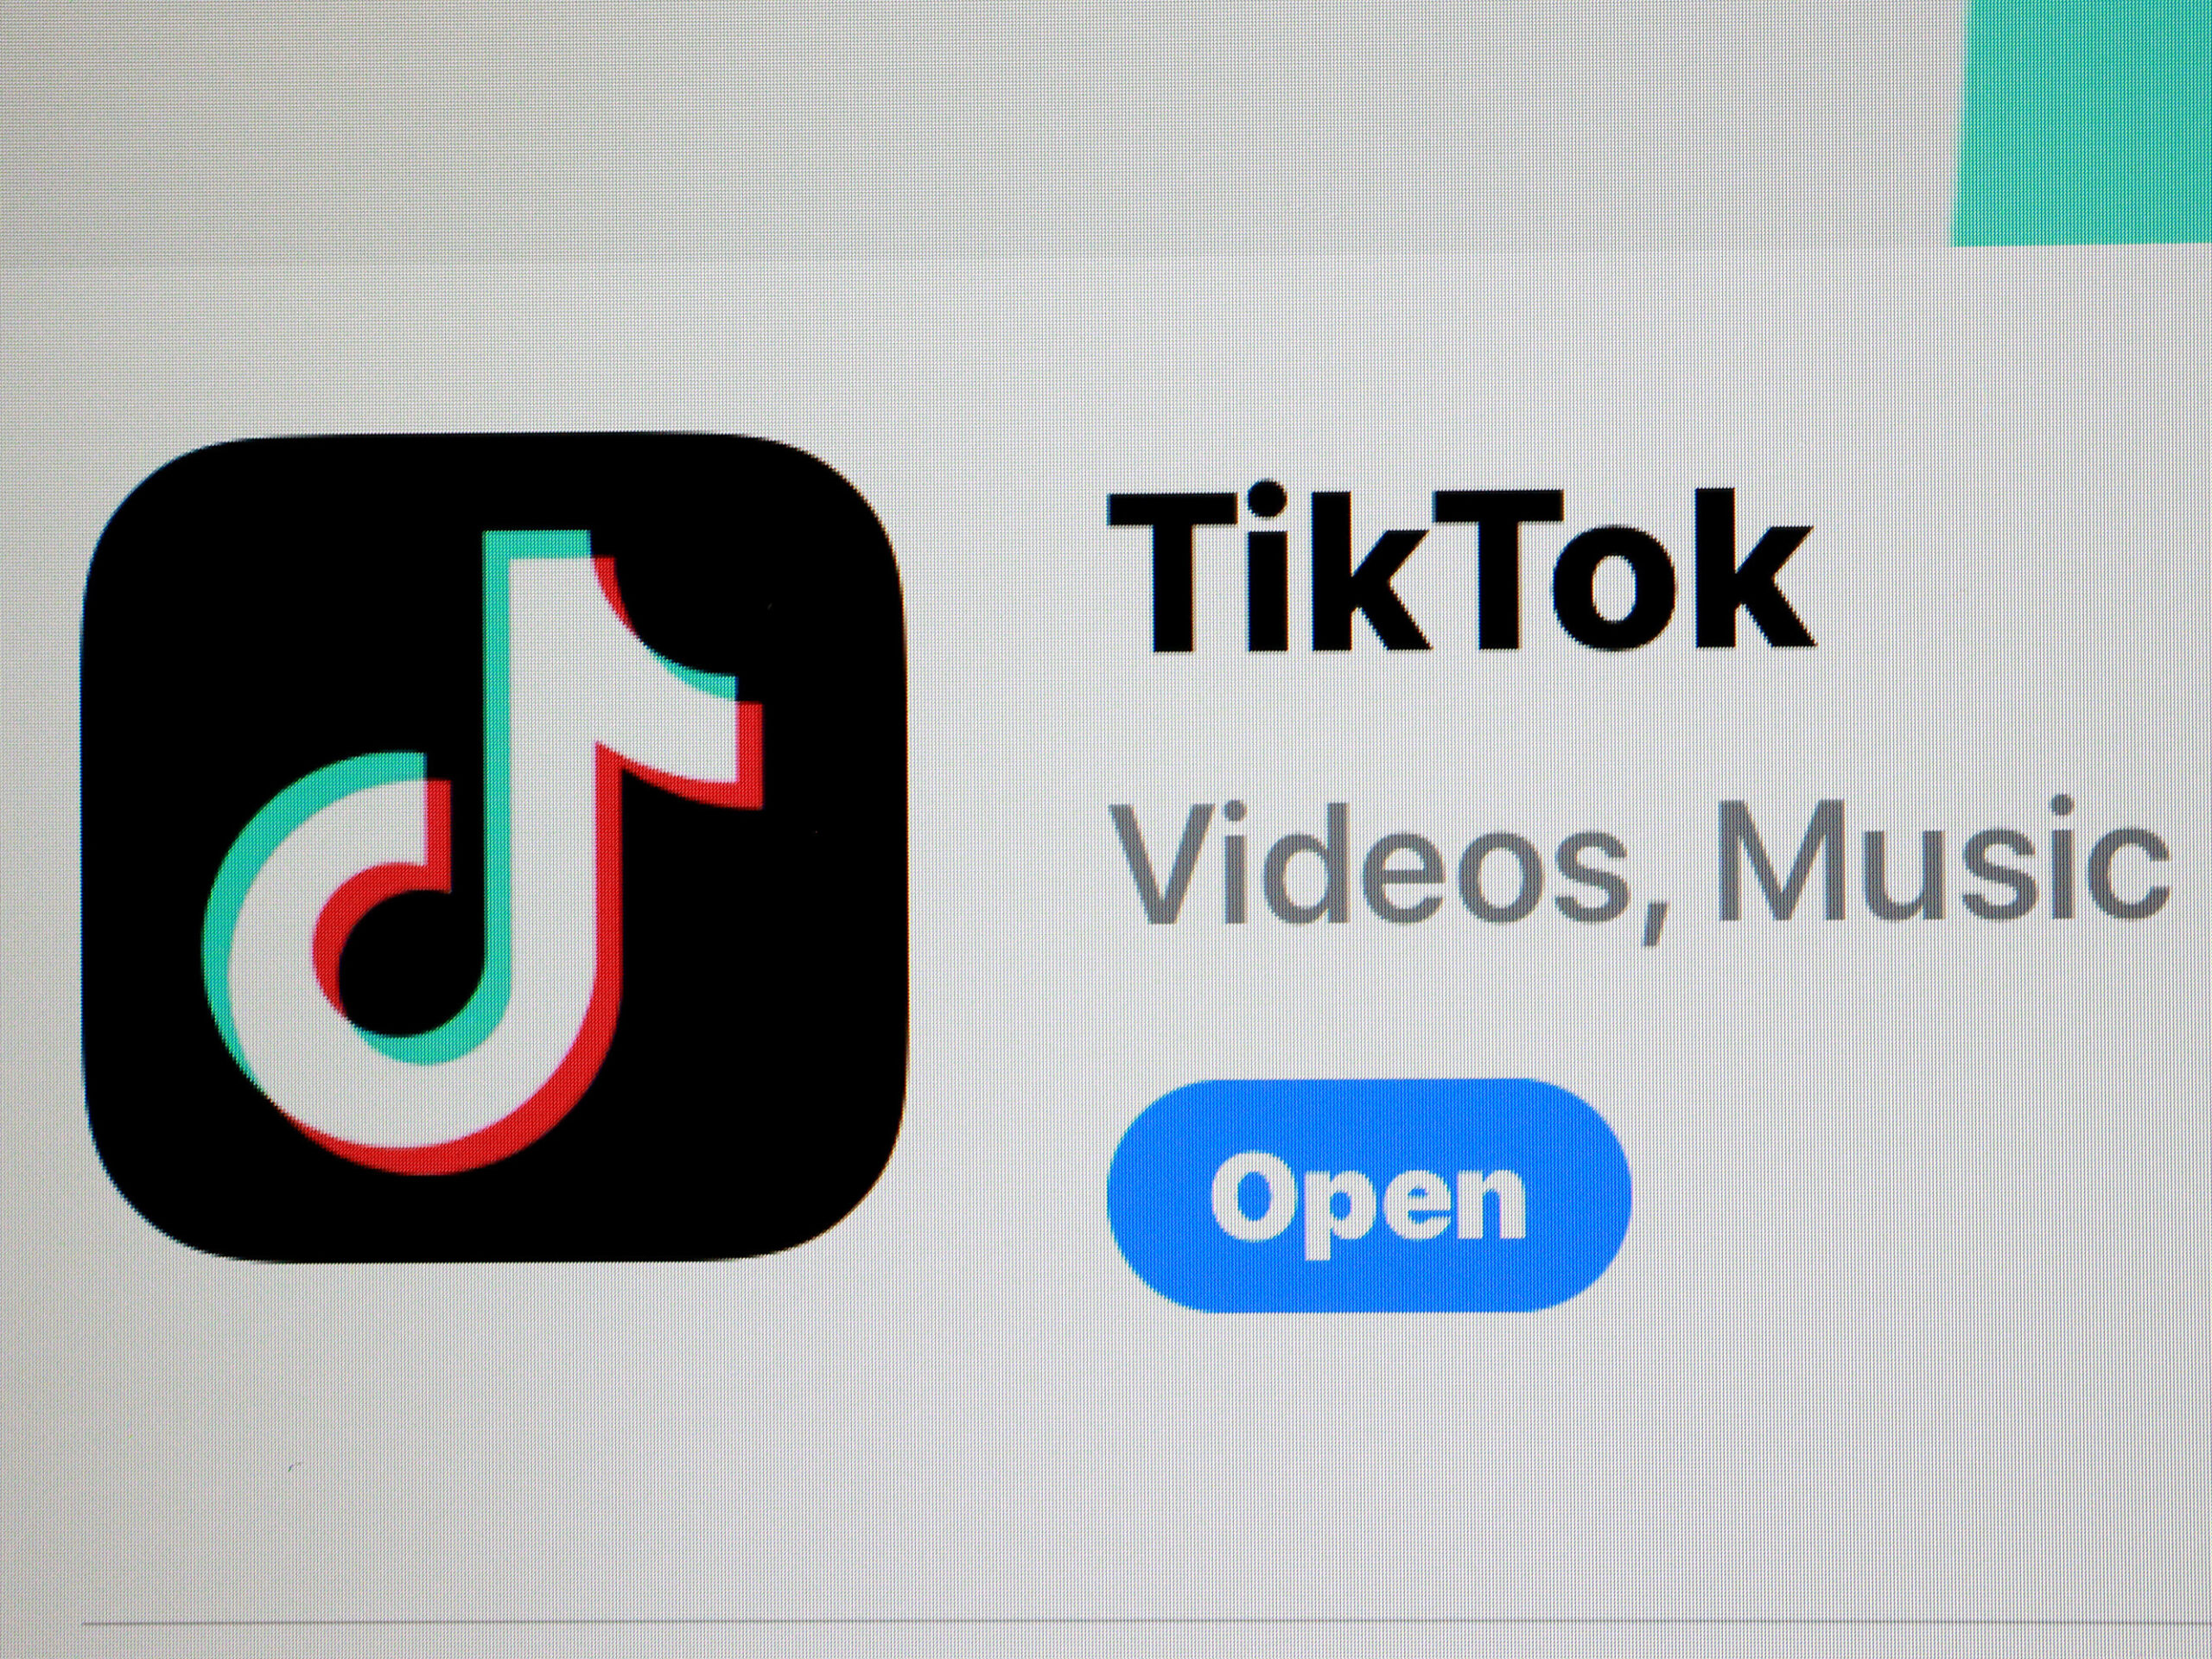 A newly signed law requires that the Chinese-owned TikTok app be sold to satisfy national security concerns.